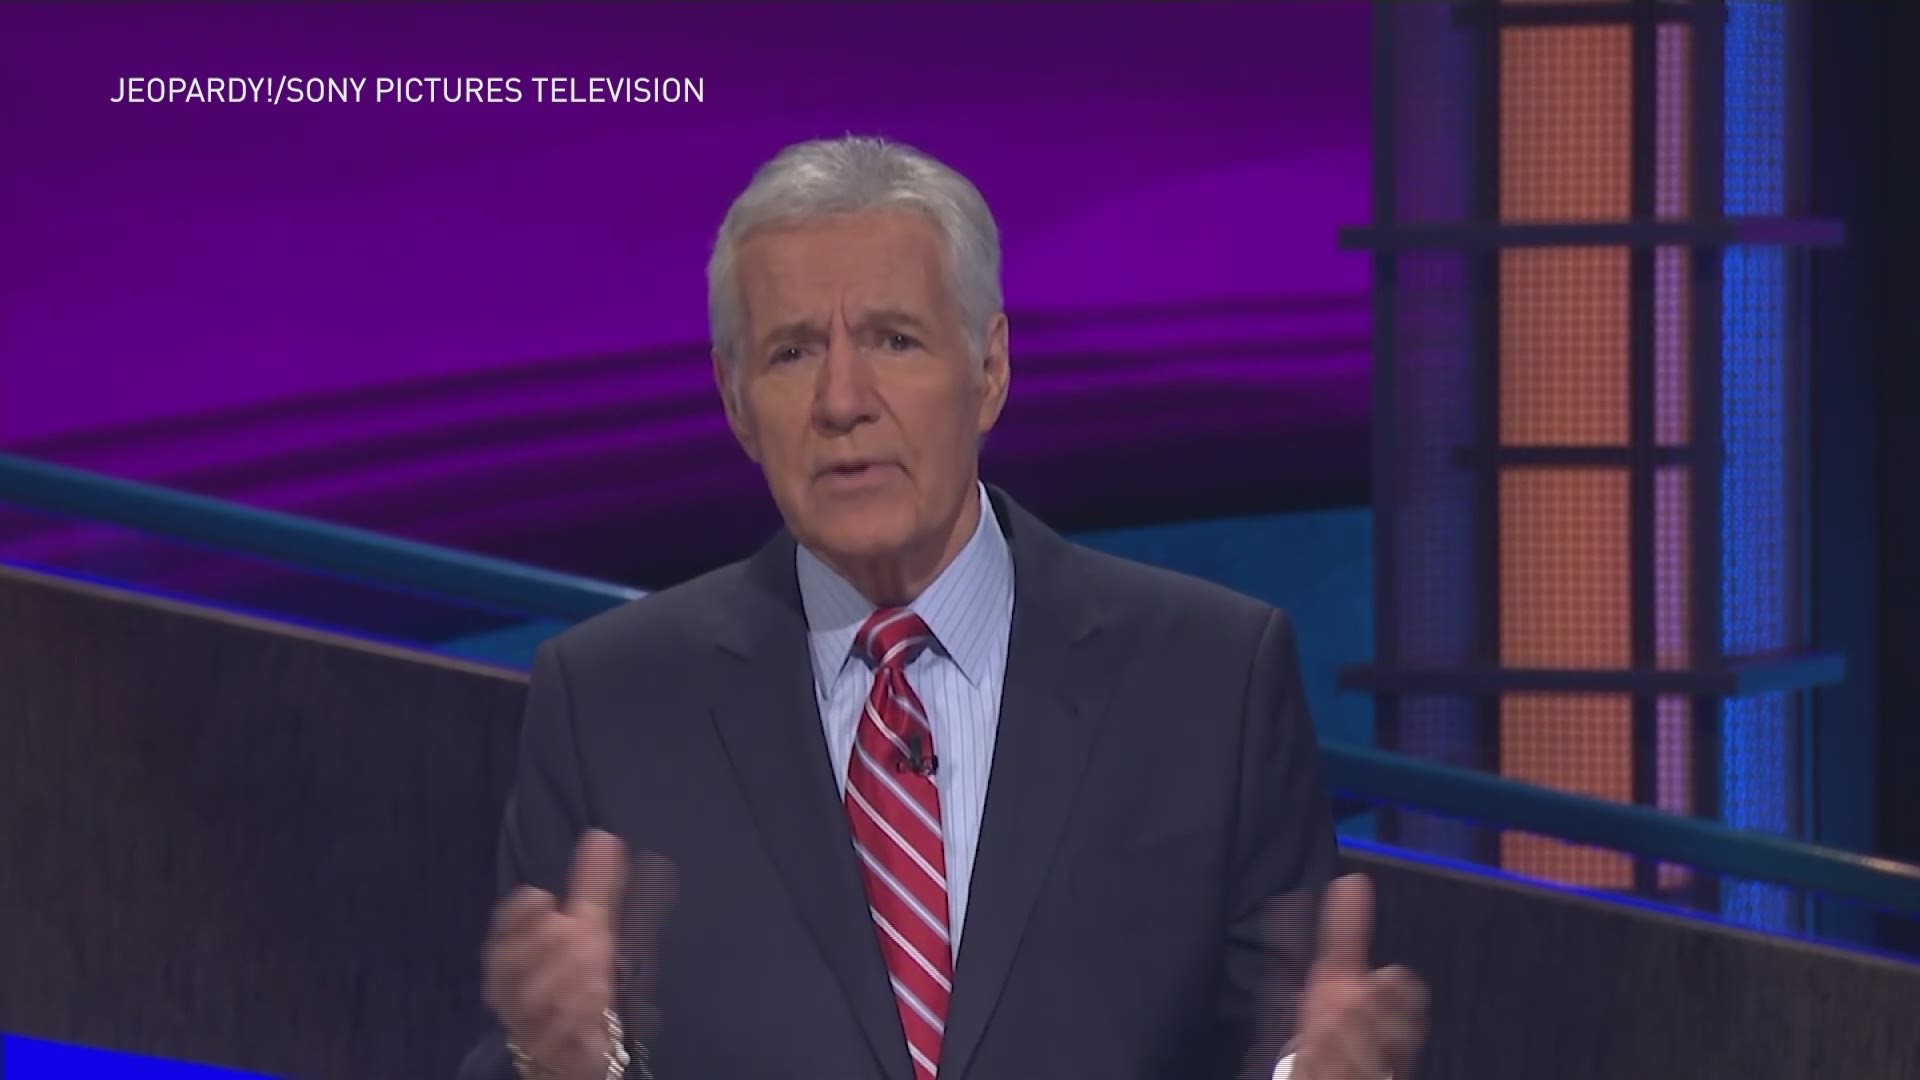 In a message to 'Jeopardy' viewers, host Alex Trebek revealed Wednesday that he has been diagnosed with stage 4 pancreatic cancer.